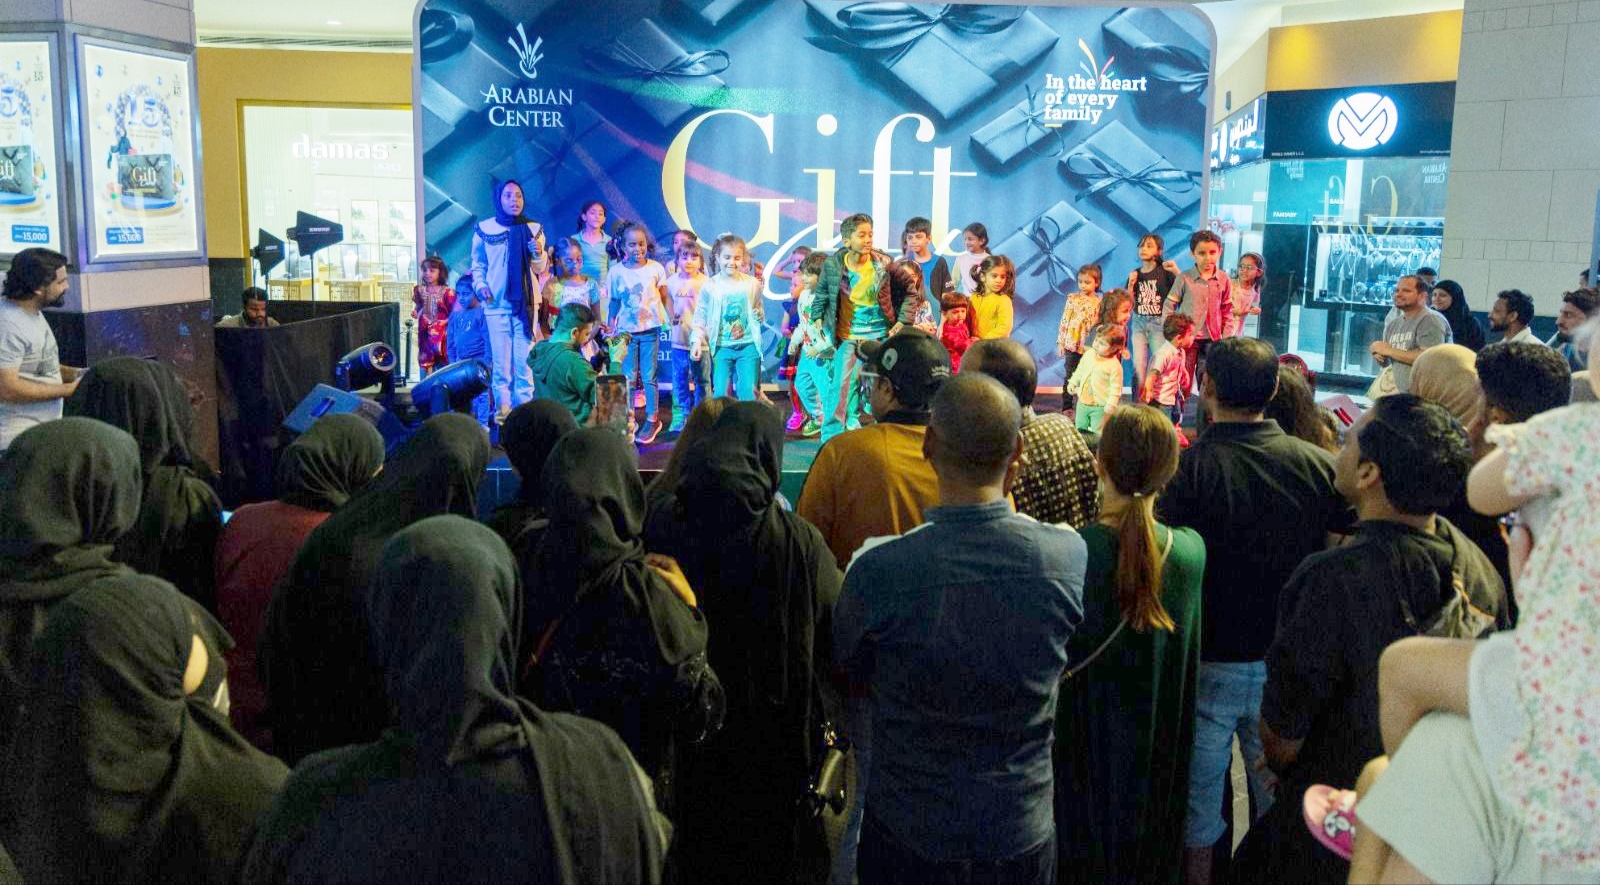 Arabian Center Celebrates 15th Anniversary with the Launch of a New Gift Card